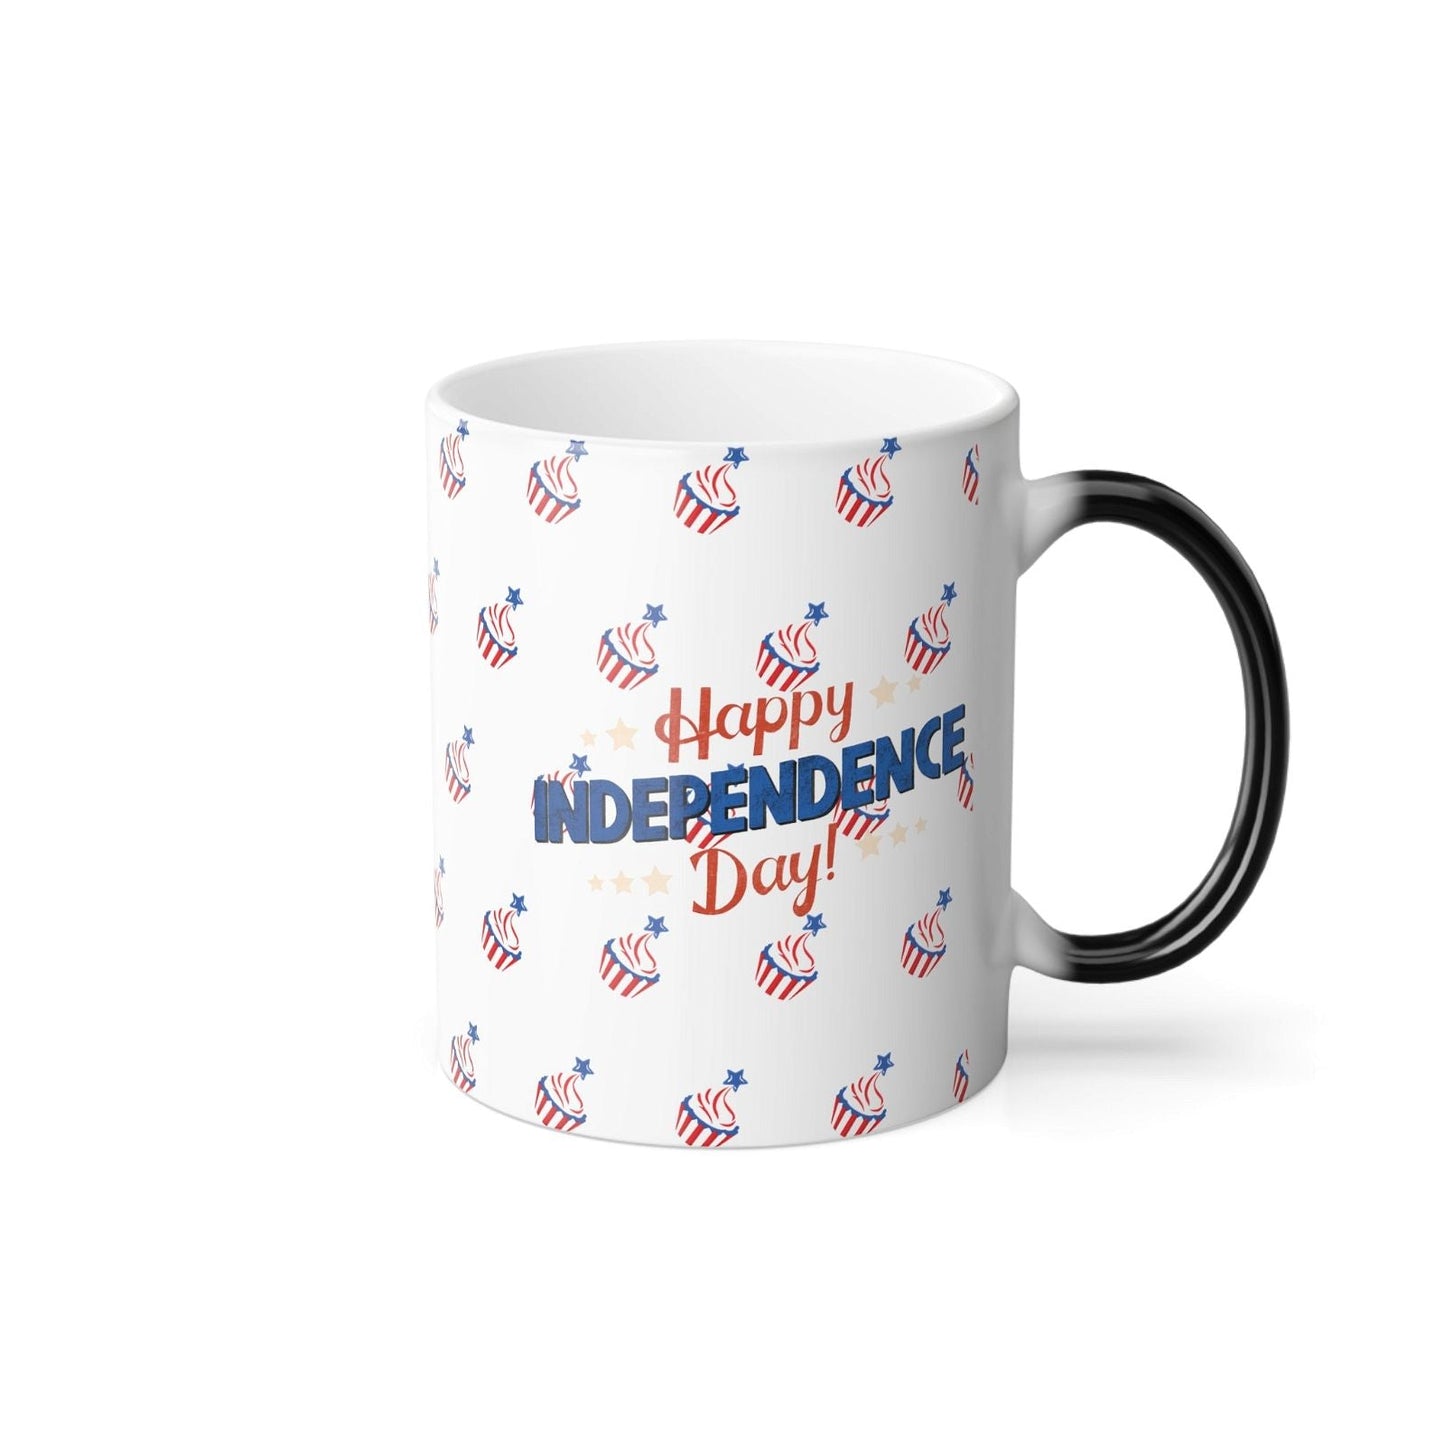 Happy 4th of july - Morphing mugs - Alex's Store - 11oz - 